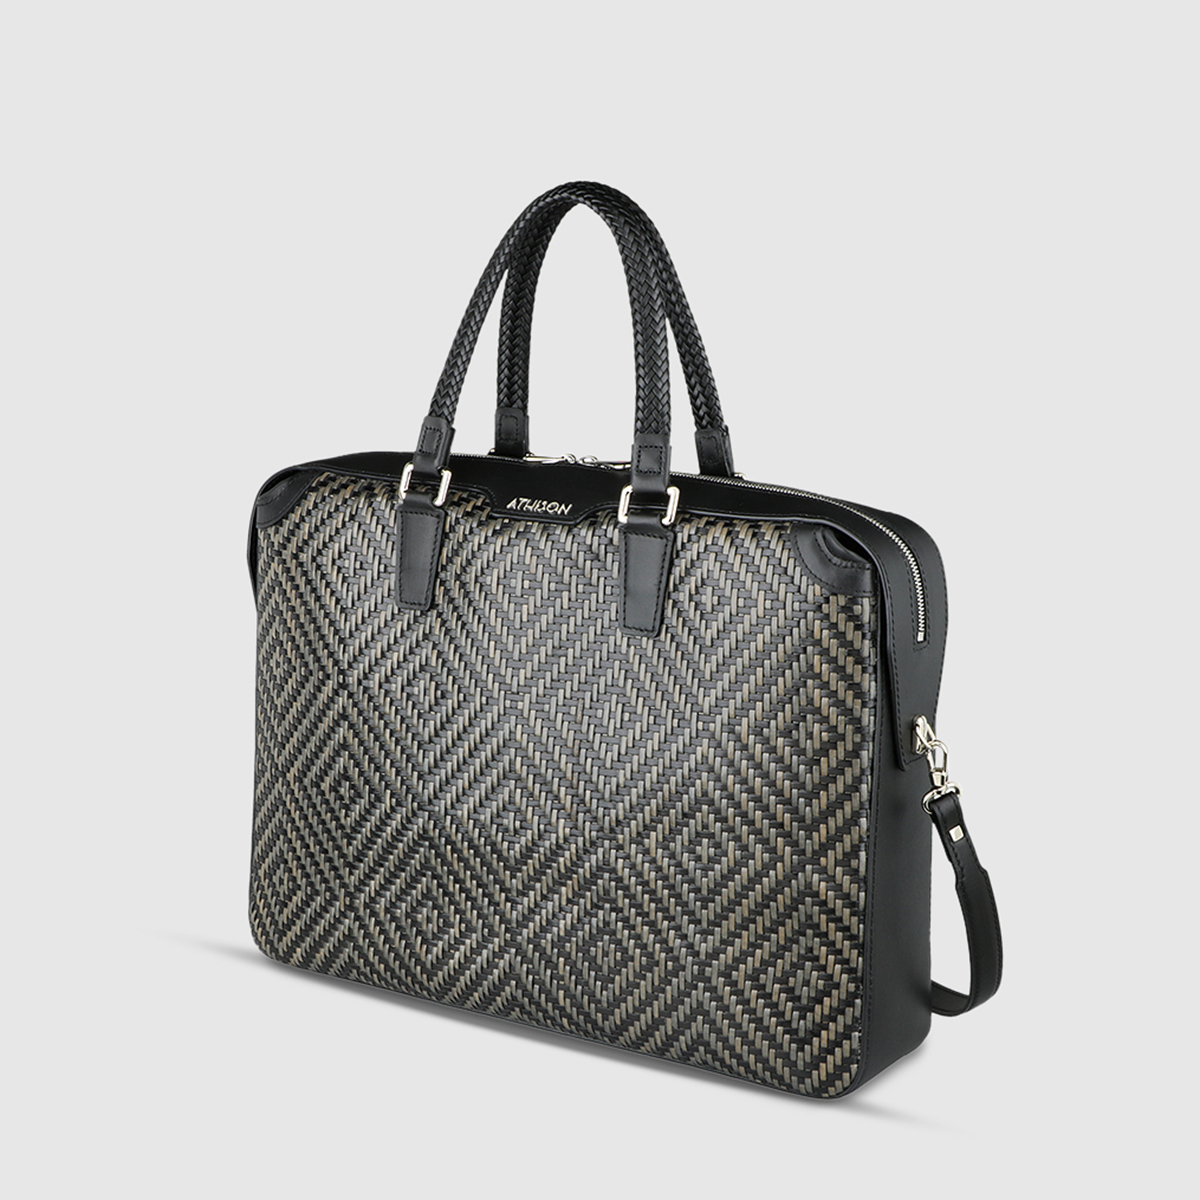 Athison Gray/Black Leather Bag